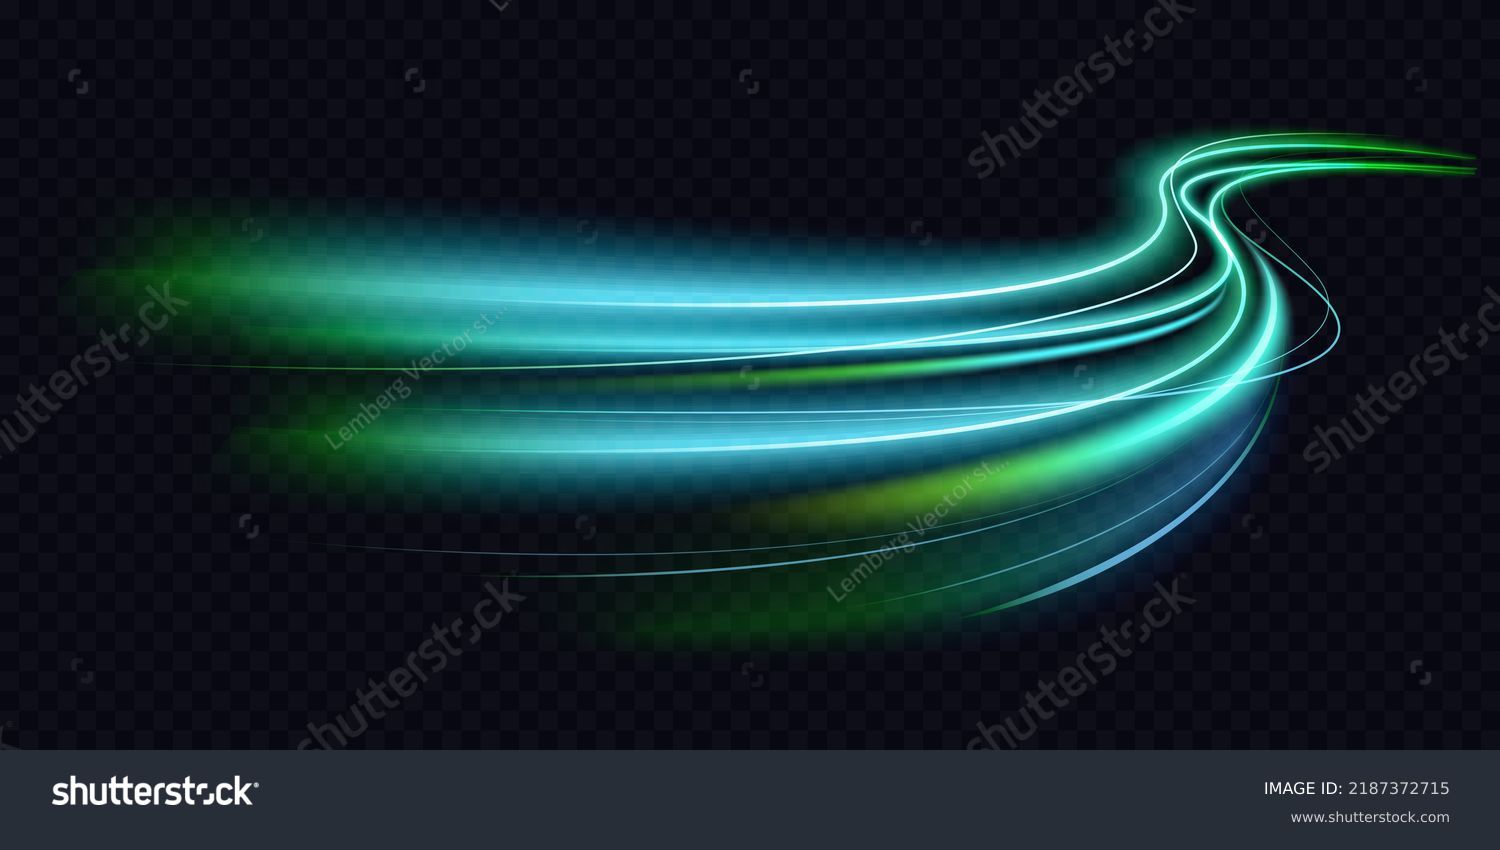 Abstract green blue wave light effect in perspective vector illustration. Magic luminous azure glow design element on dark background, flash luminosity, abstract neon motion glowing wavy lines #2187372715